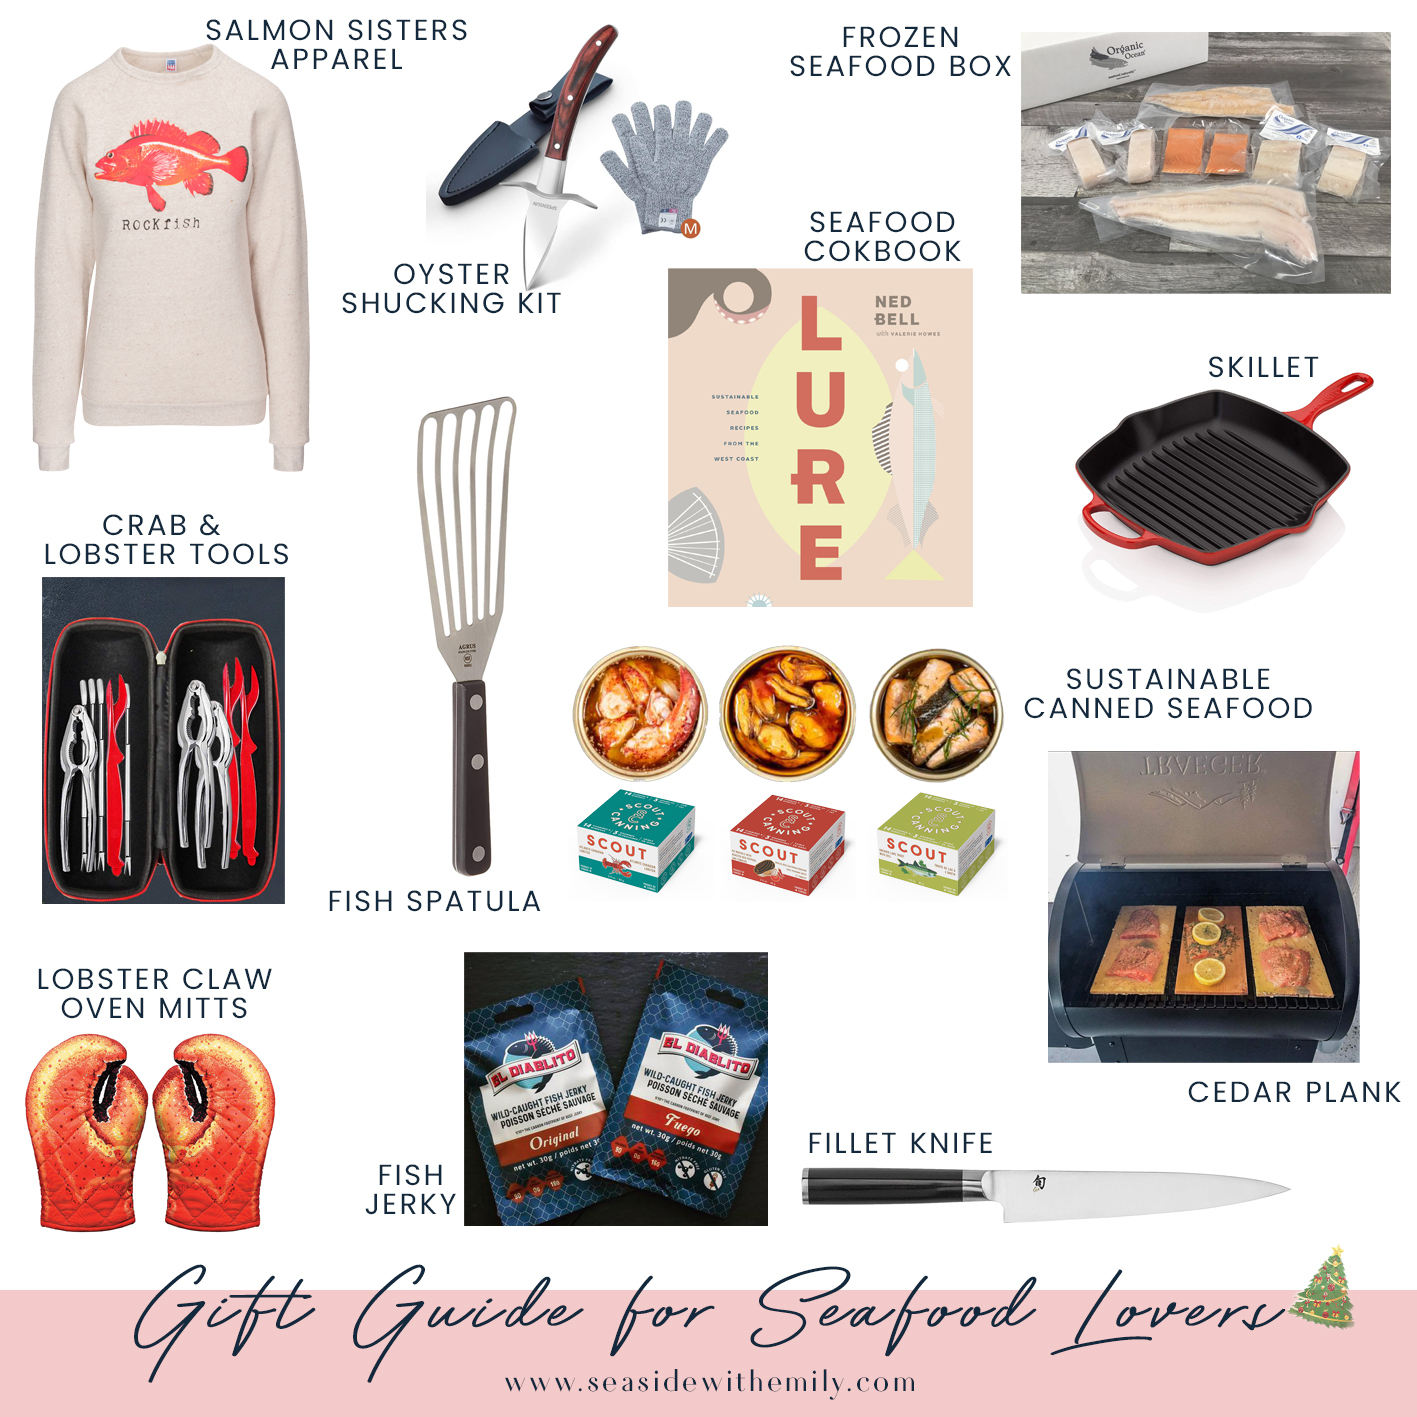 Gift suggestions for boyfriend who loves to fish? Totally clueless